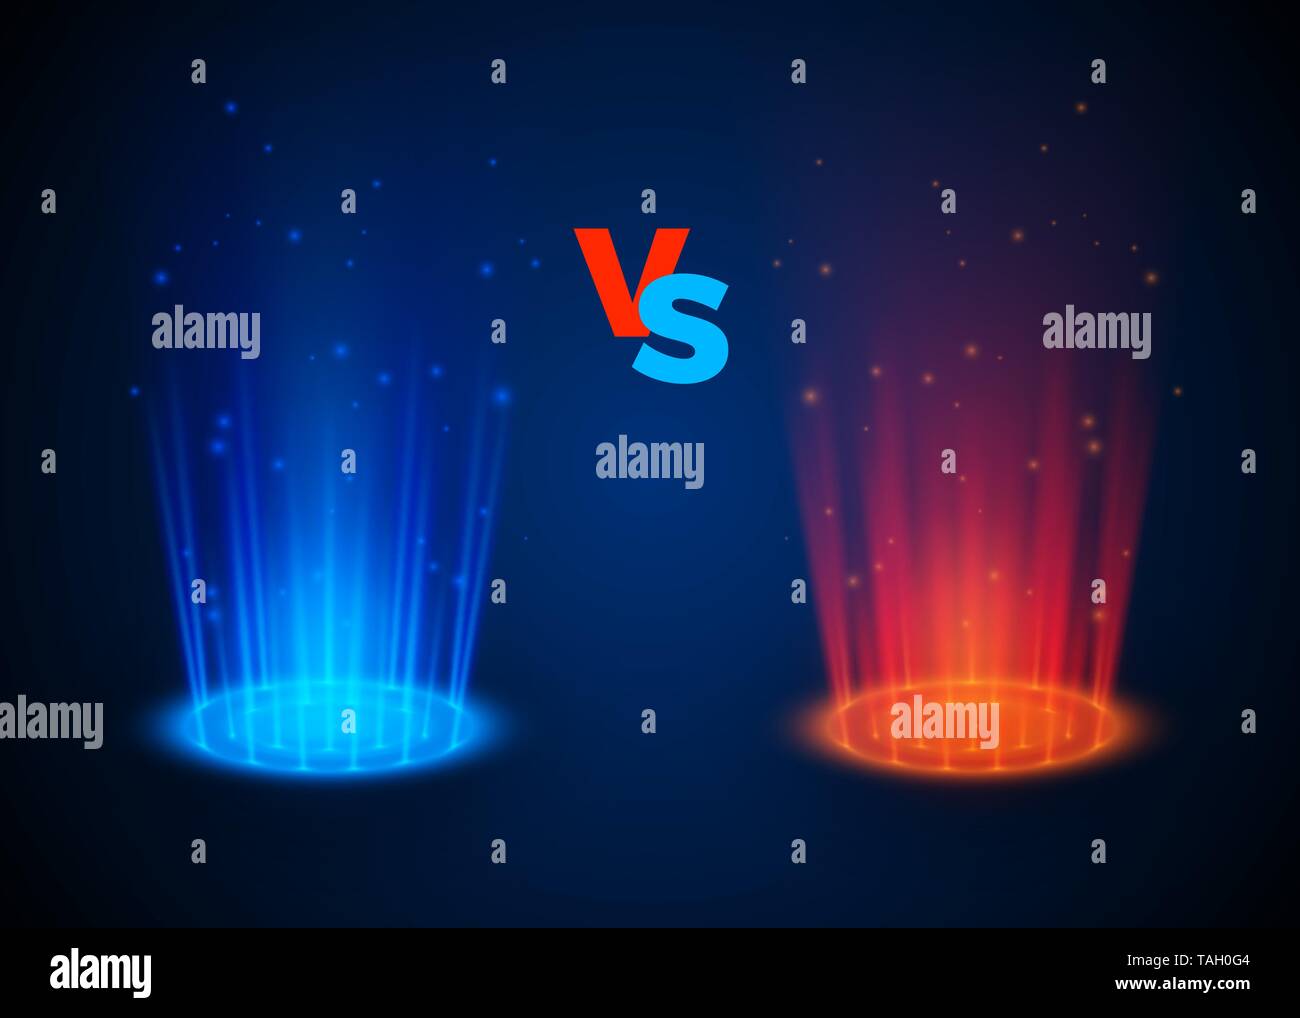 Versus glowing spotlight red and blue colors. Abstract hologram. VS battle scene with rays and sparks. vector illustration Stock Vector